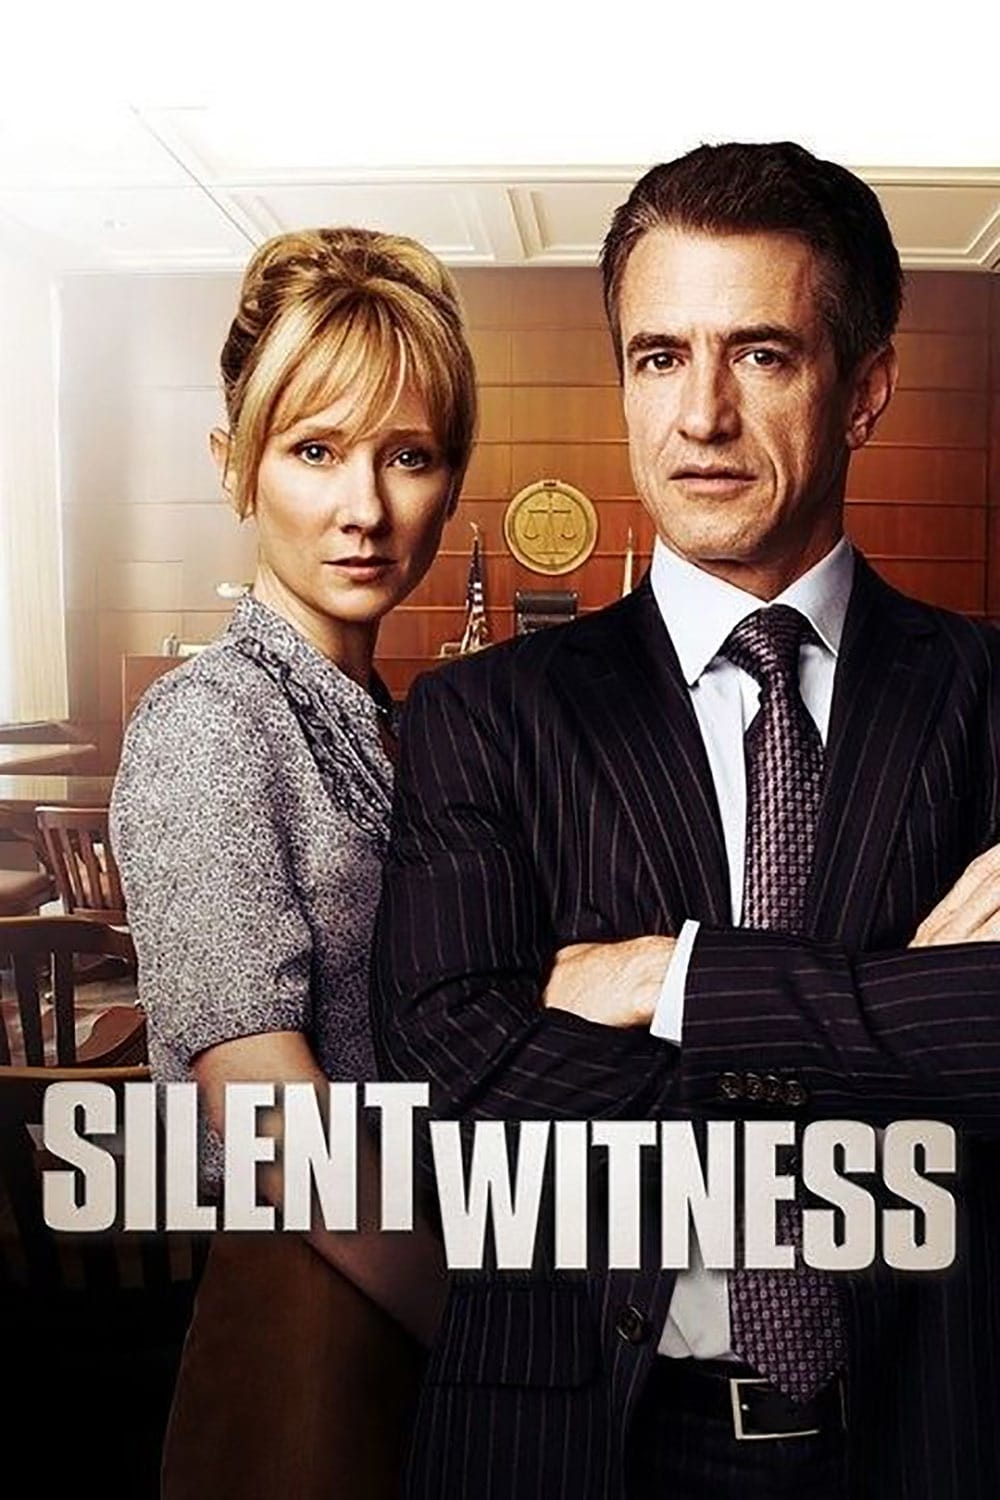 Watch Silent Witness (2011) Full Movie Free Online on PlayHD Stream - Cast Of Silent Witness Series 25 Episode 4